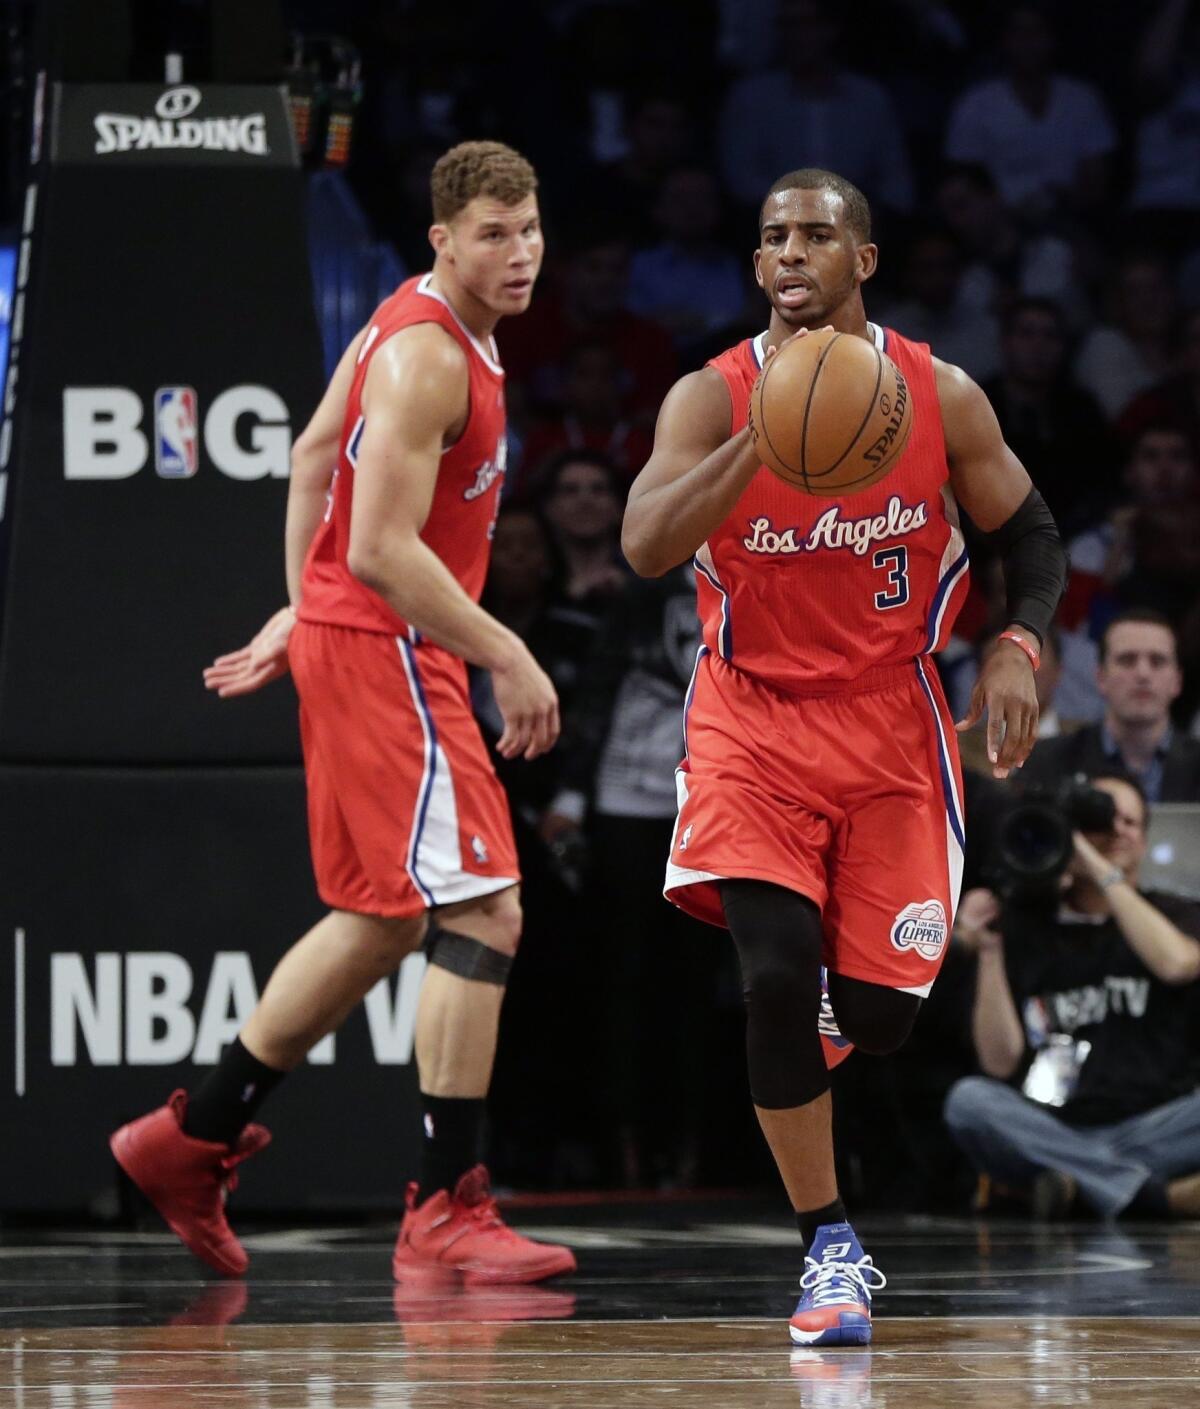 Clippers point guard Chris Paul, right, dribbles the ball ahead of teammate Blake Griffin during the Clippers' 102-93 loss to the Brooklyn Nets.